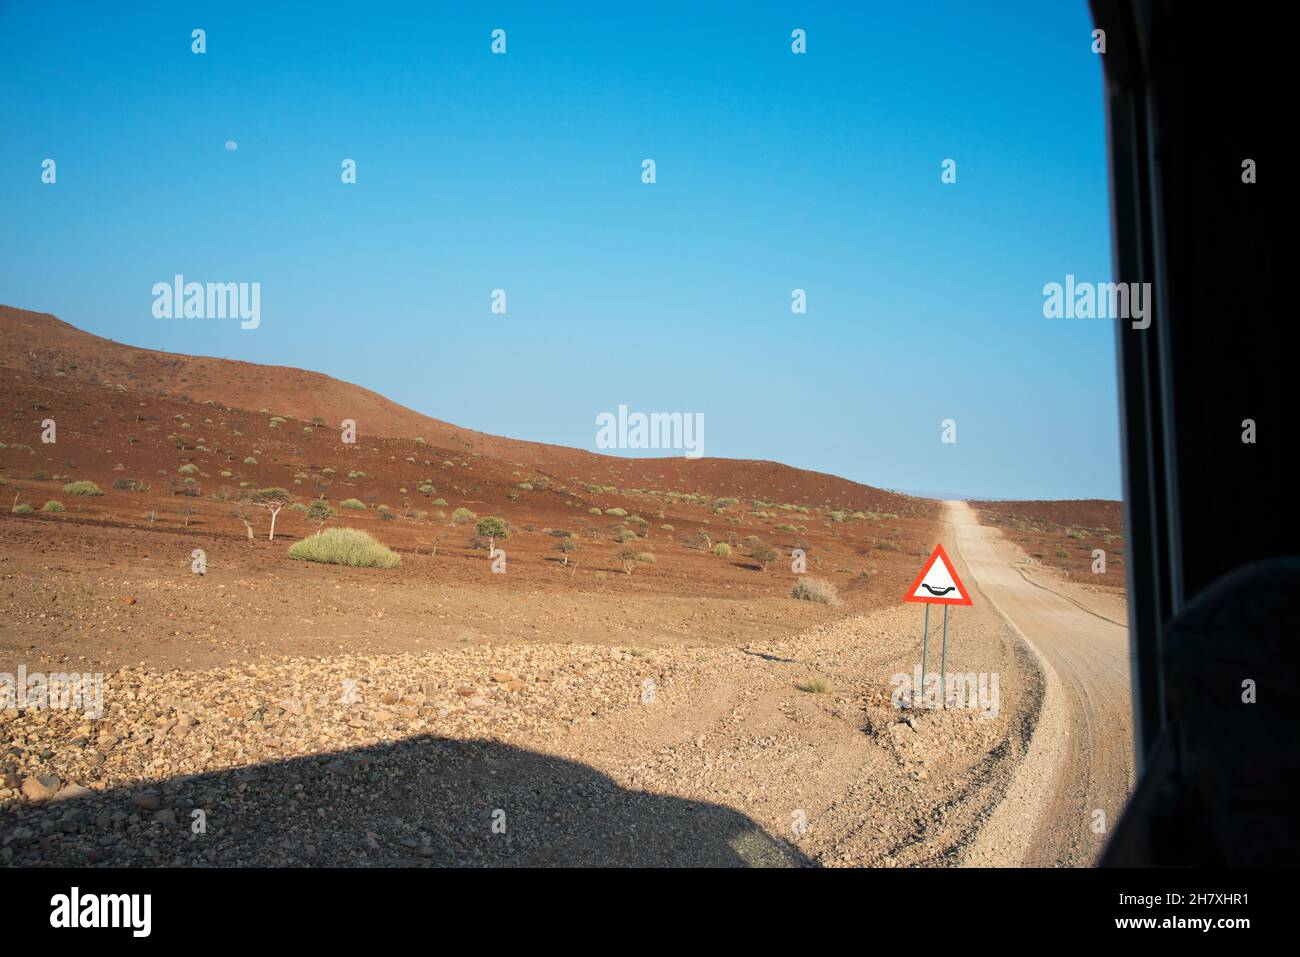 Arid landscape in Damaraland, Namibia. Bumpy road ahead and warning sign. Africa Stock Photo